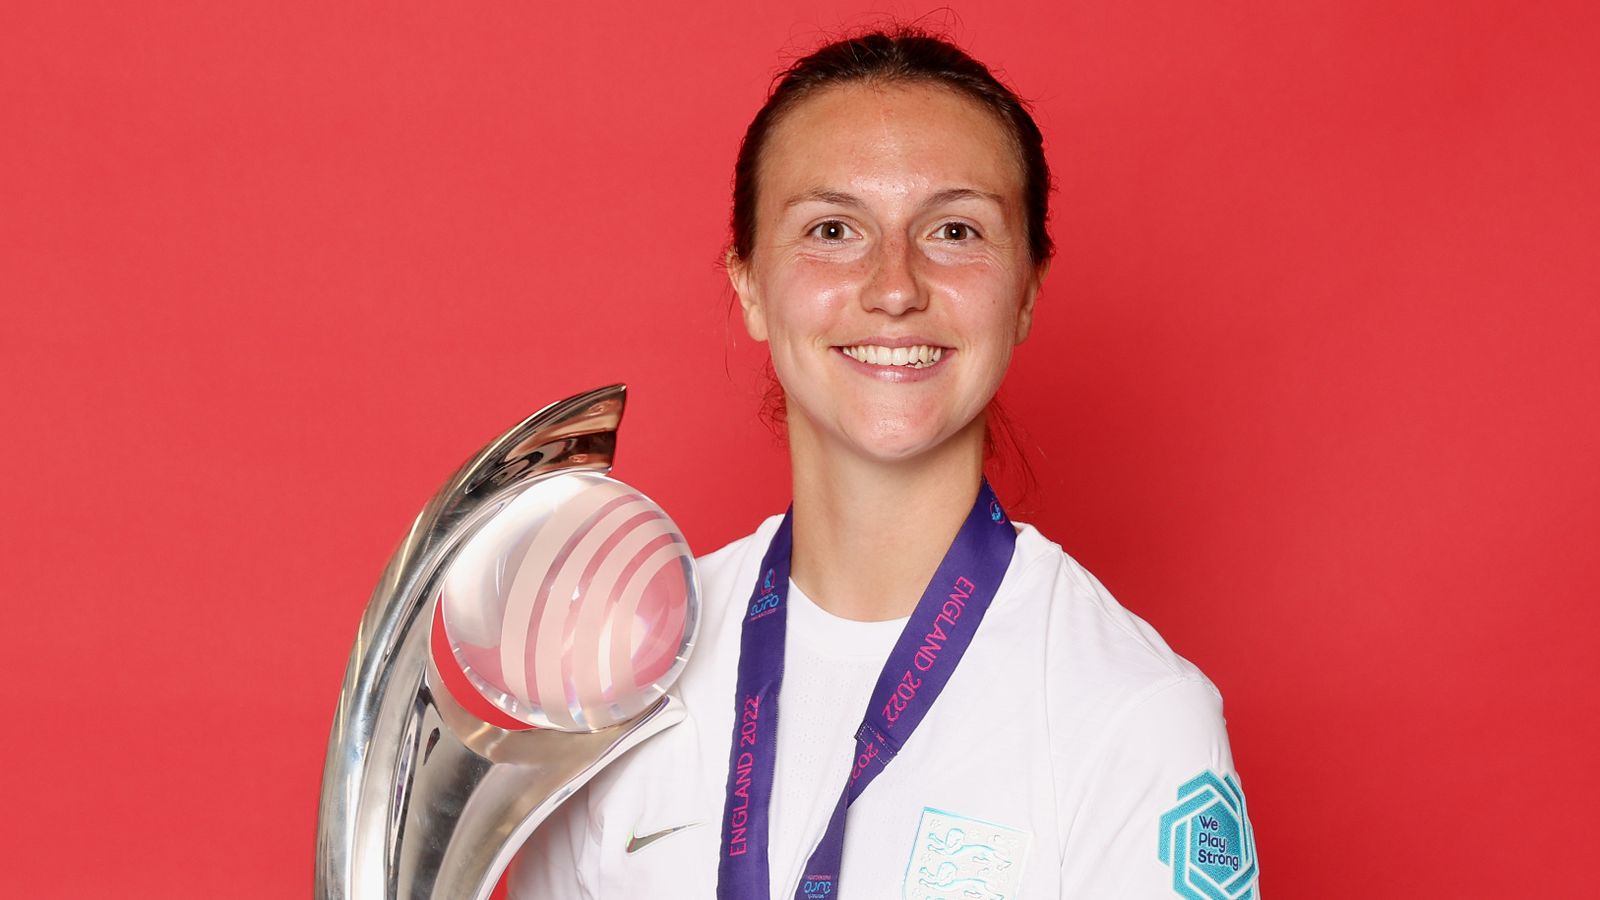 lotte-wubben-moy-interview-the-england-defender-cementing-the-legacy-of-a-historic-summer-for-the-lionesses